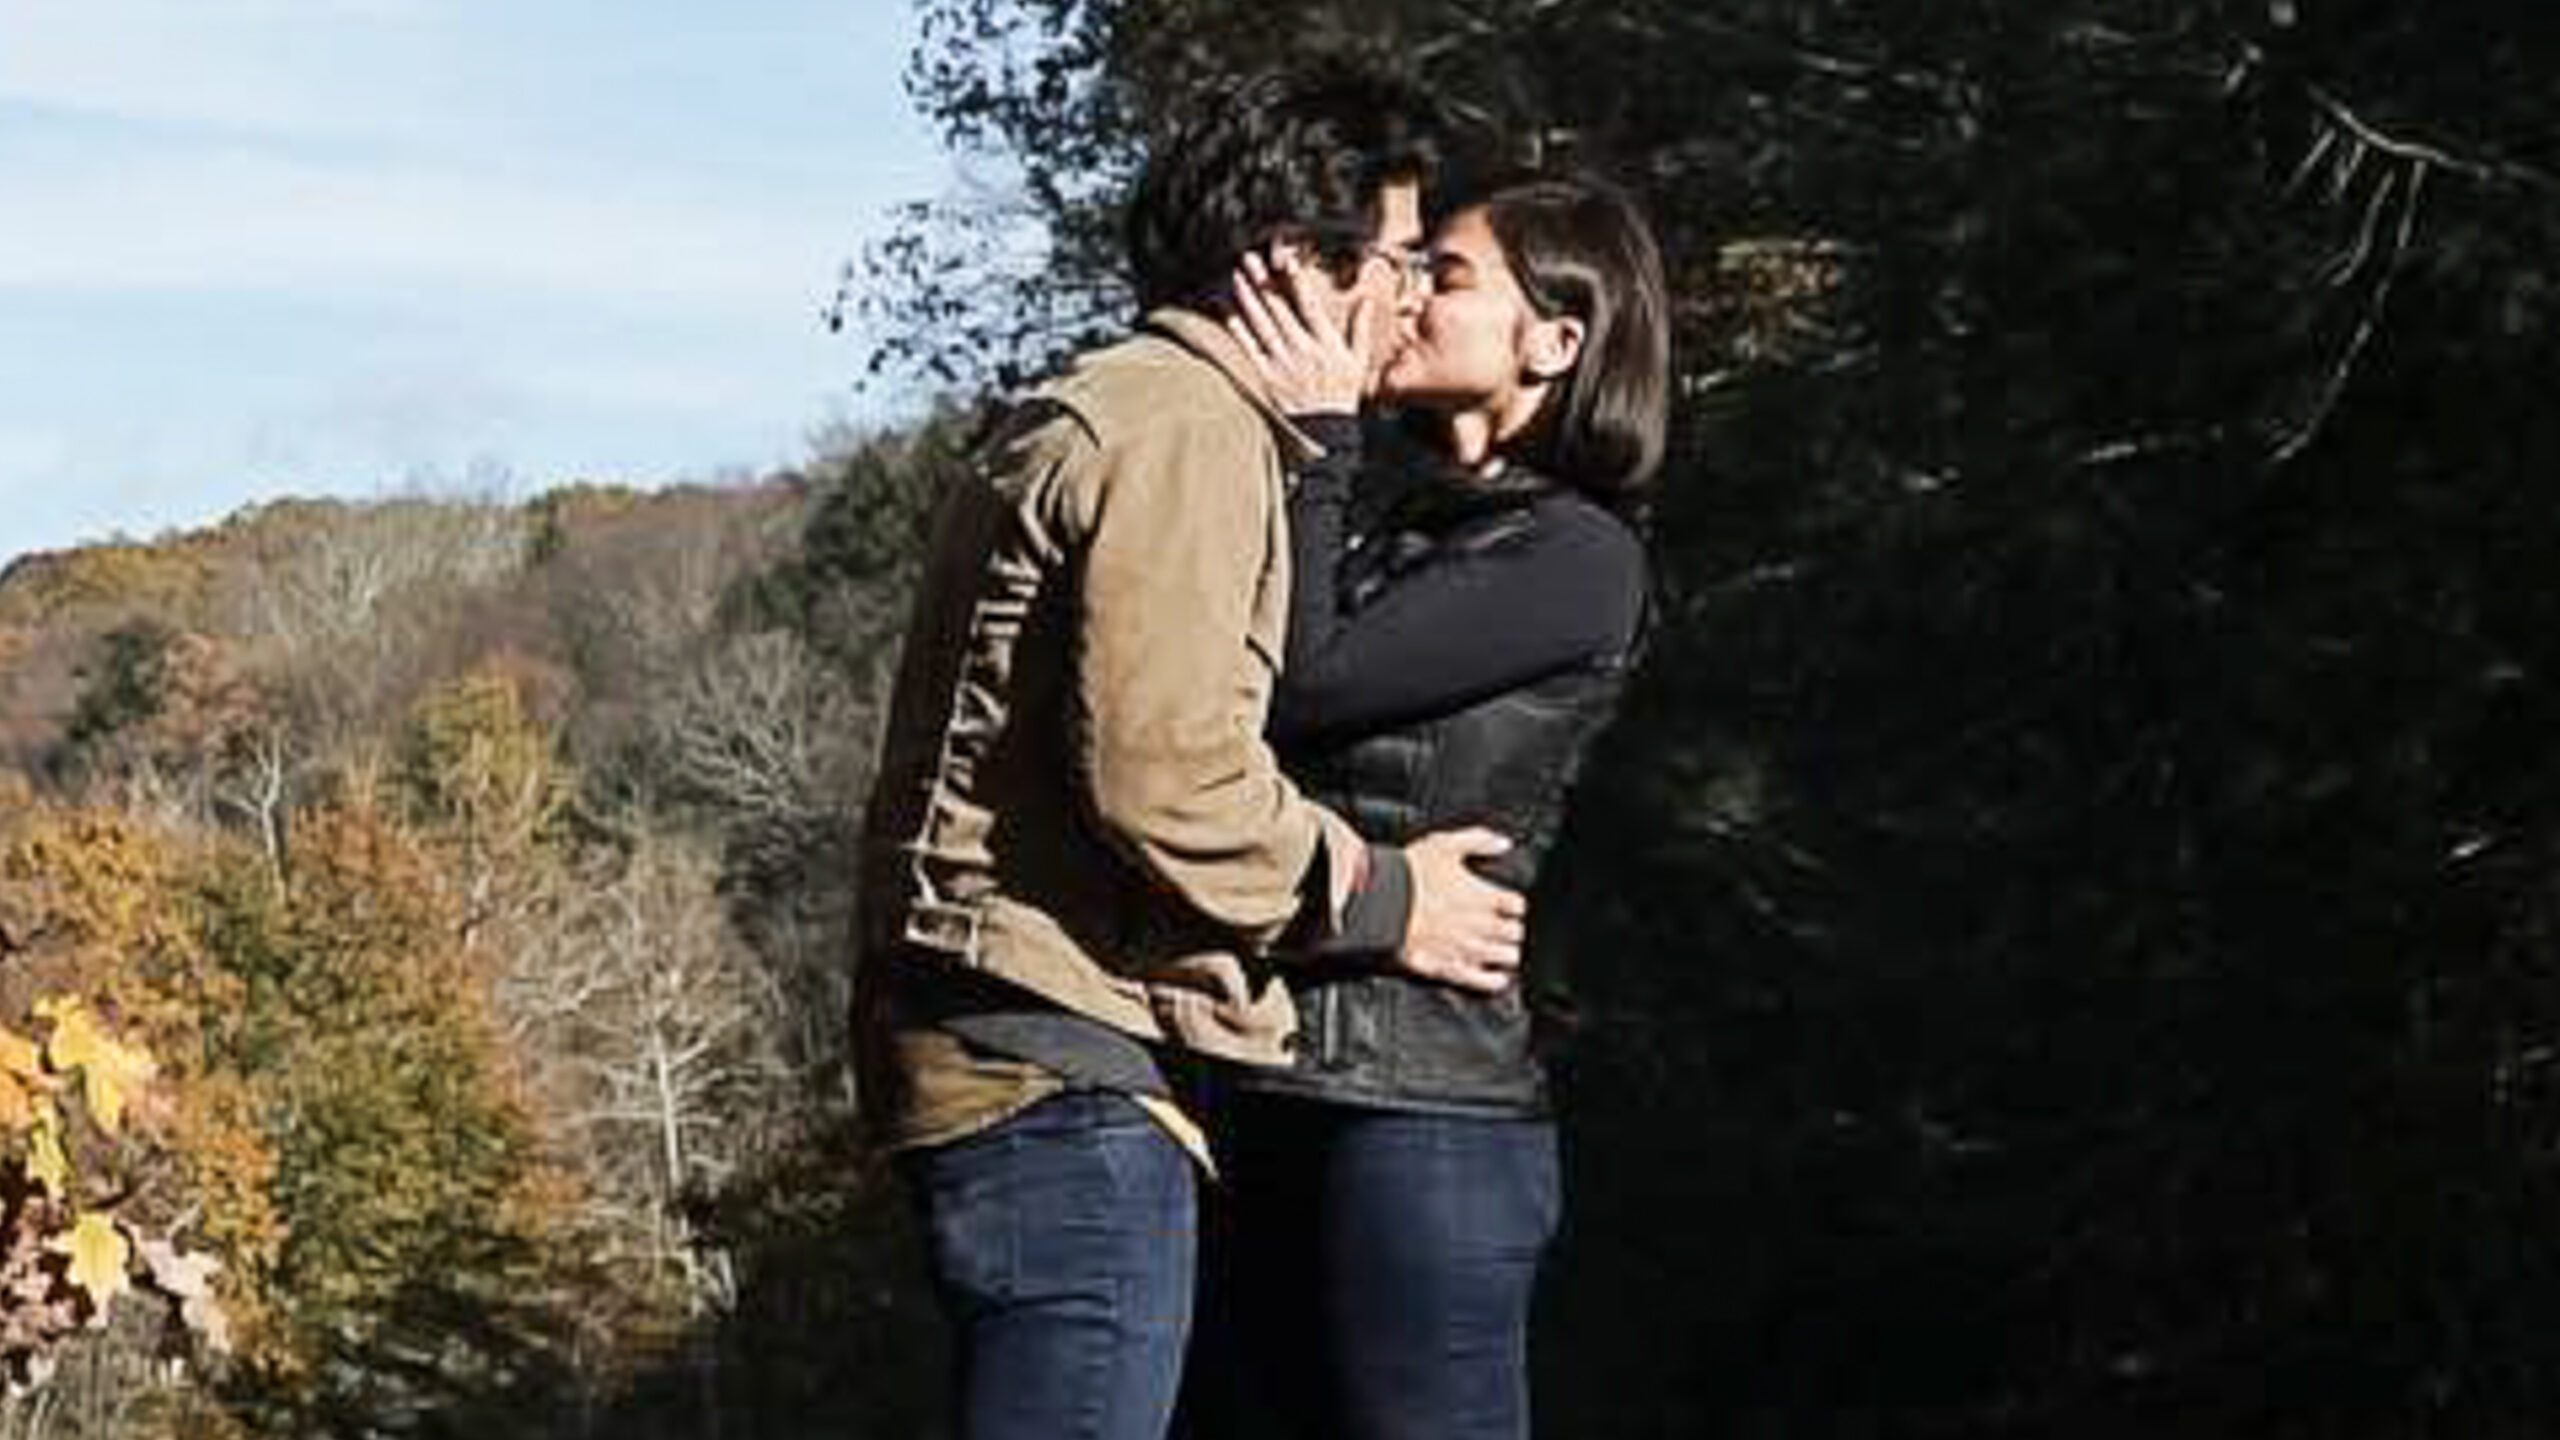 WATCH: Anne Curtis and Erwan Heussaff are engaged